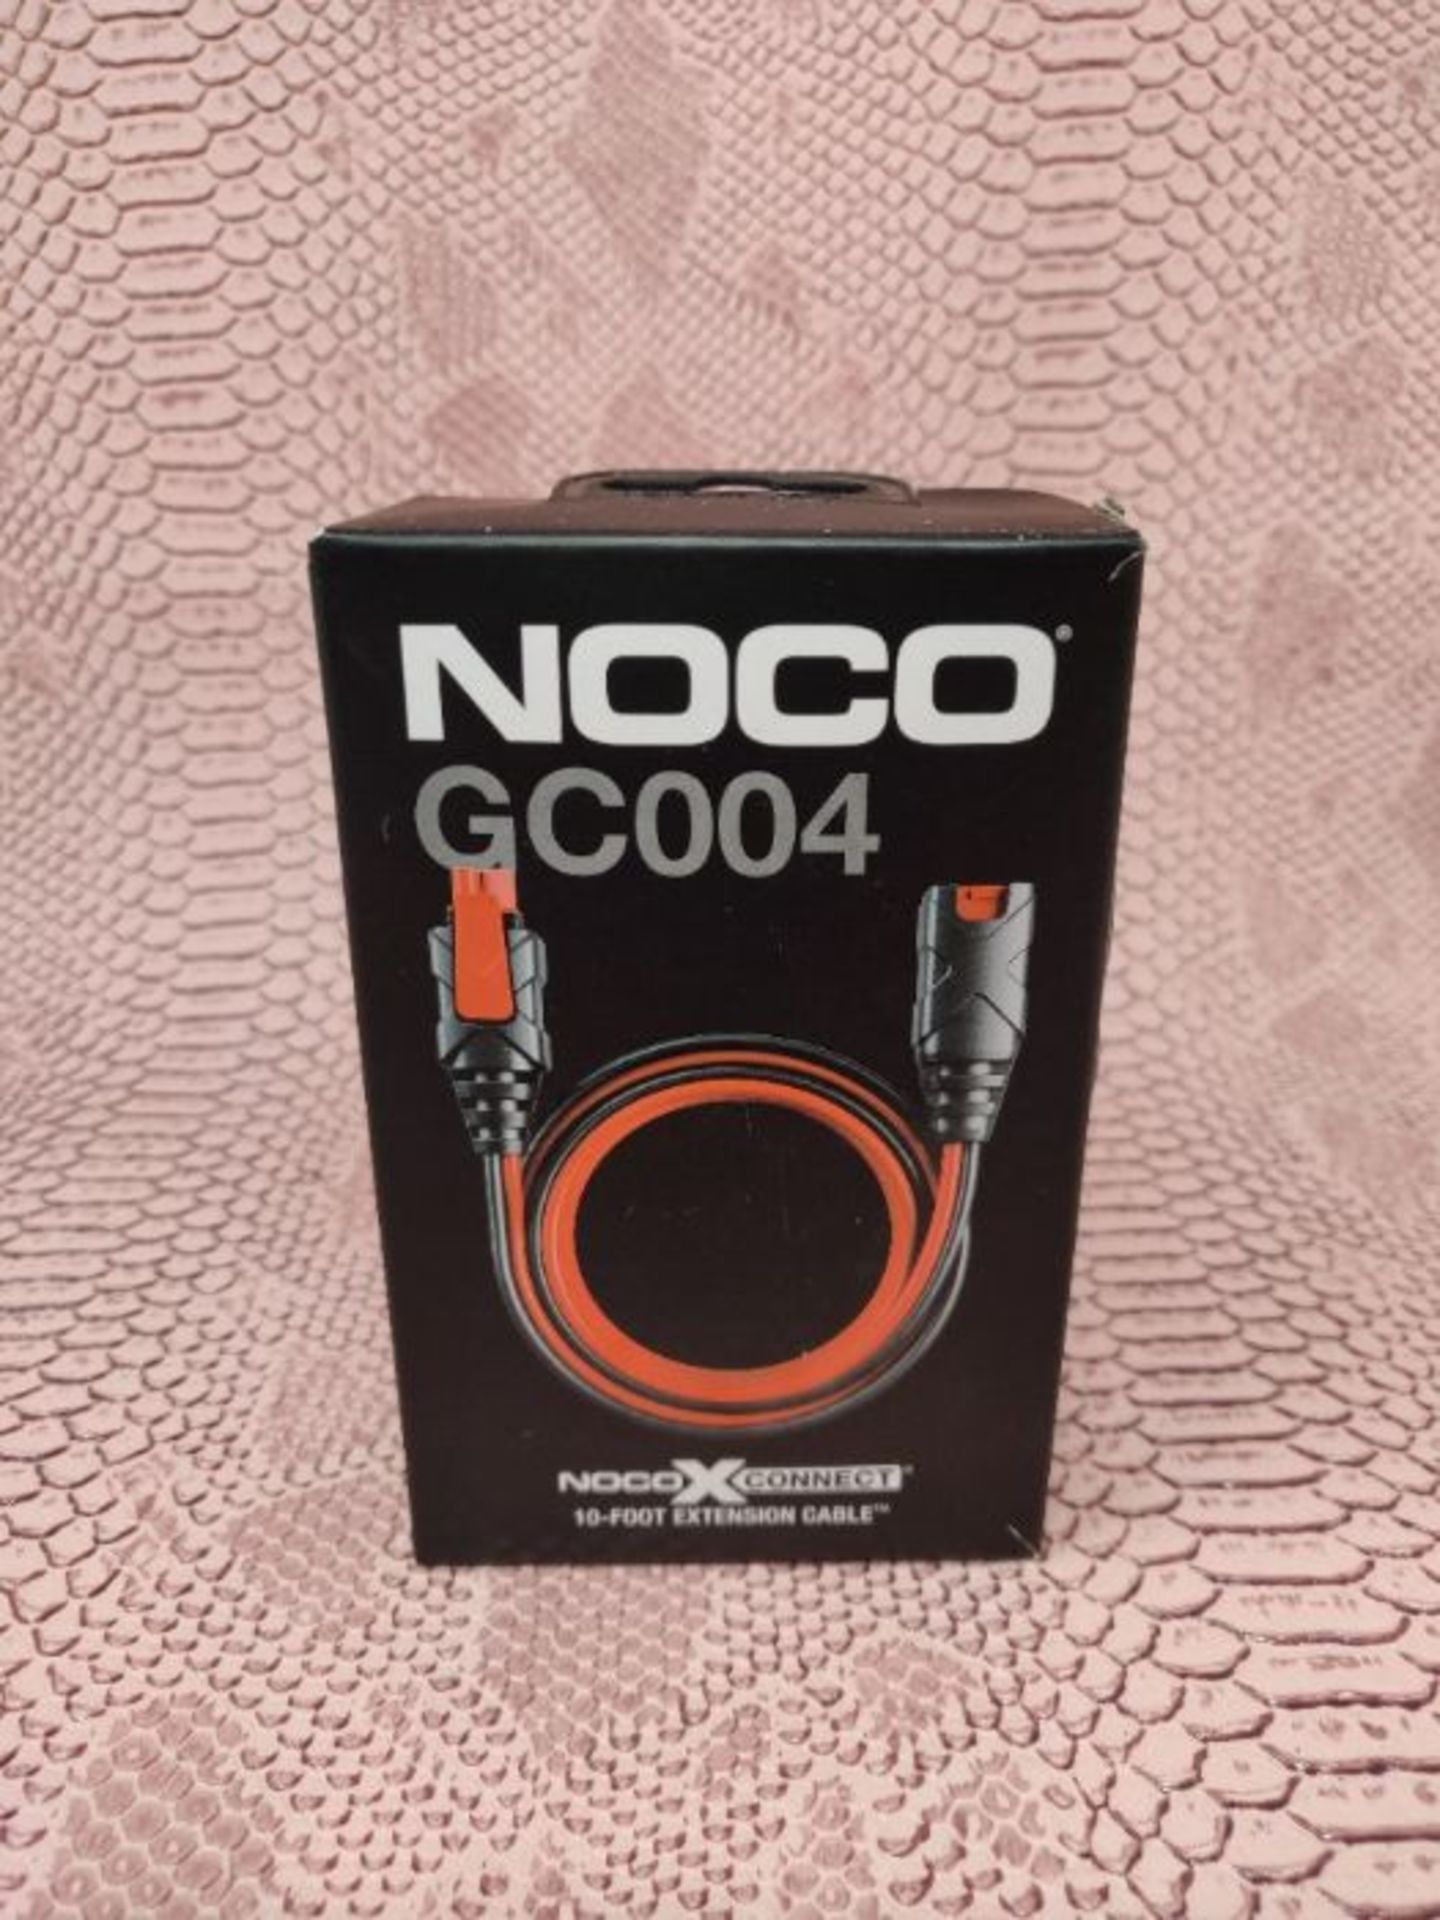 NOCO GC004 X-Connect 10-Foot (3-Meters) Extension Cable Accessory For NOCO Genius Smar - Image 2 of 3